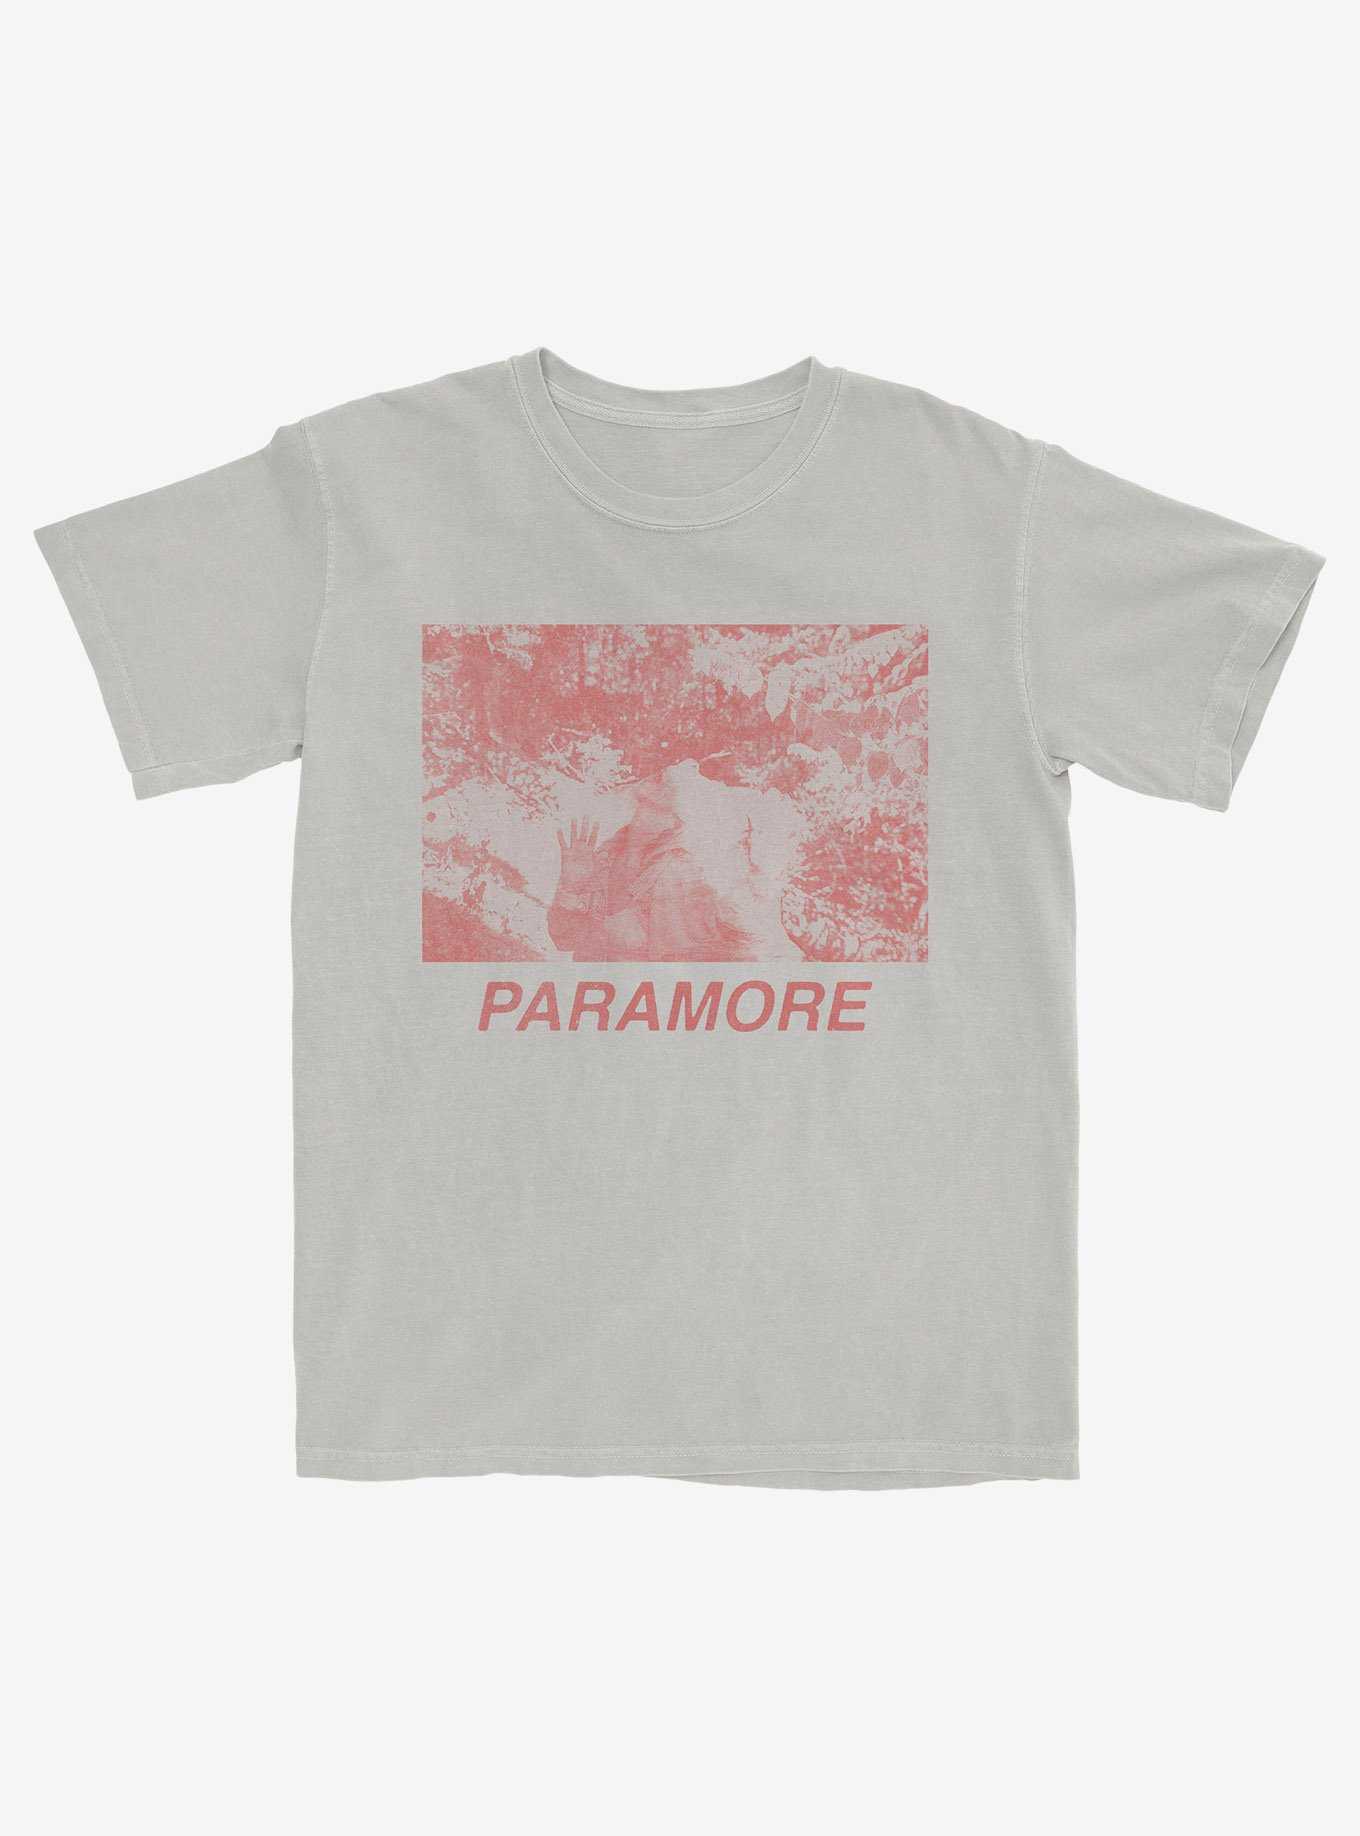 Paramore Official Band Merchandise: Clothing, Gifts and Accessories – Buy  at Grindstore